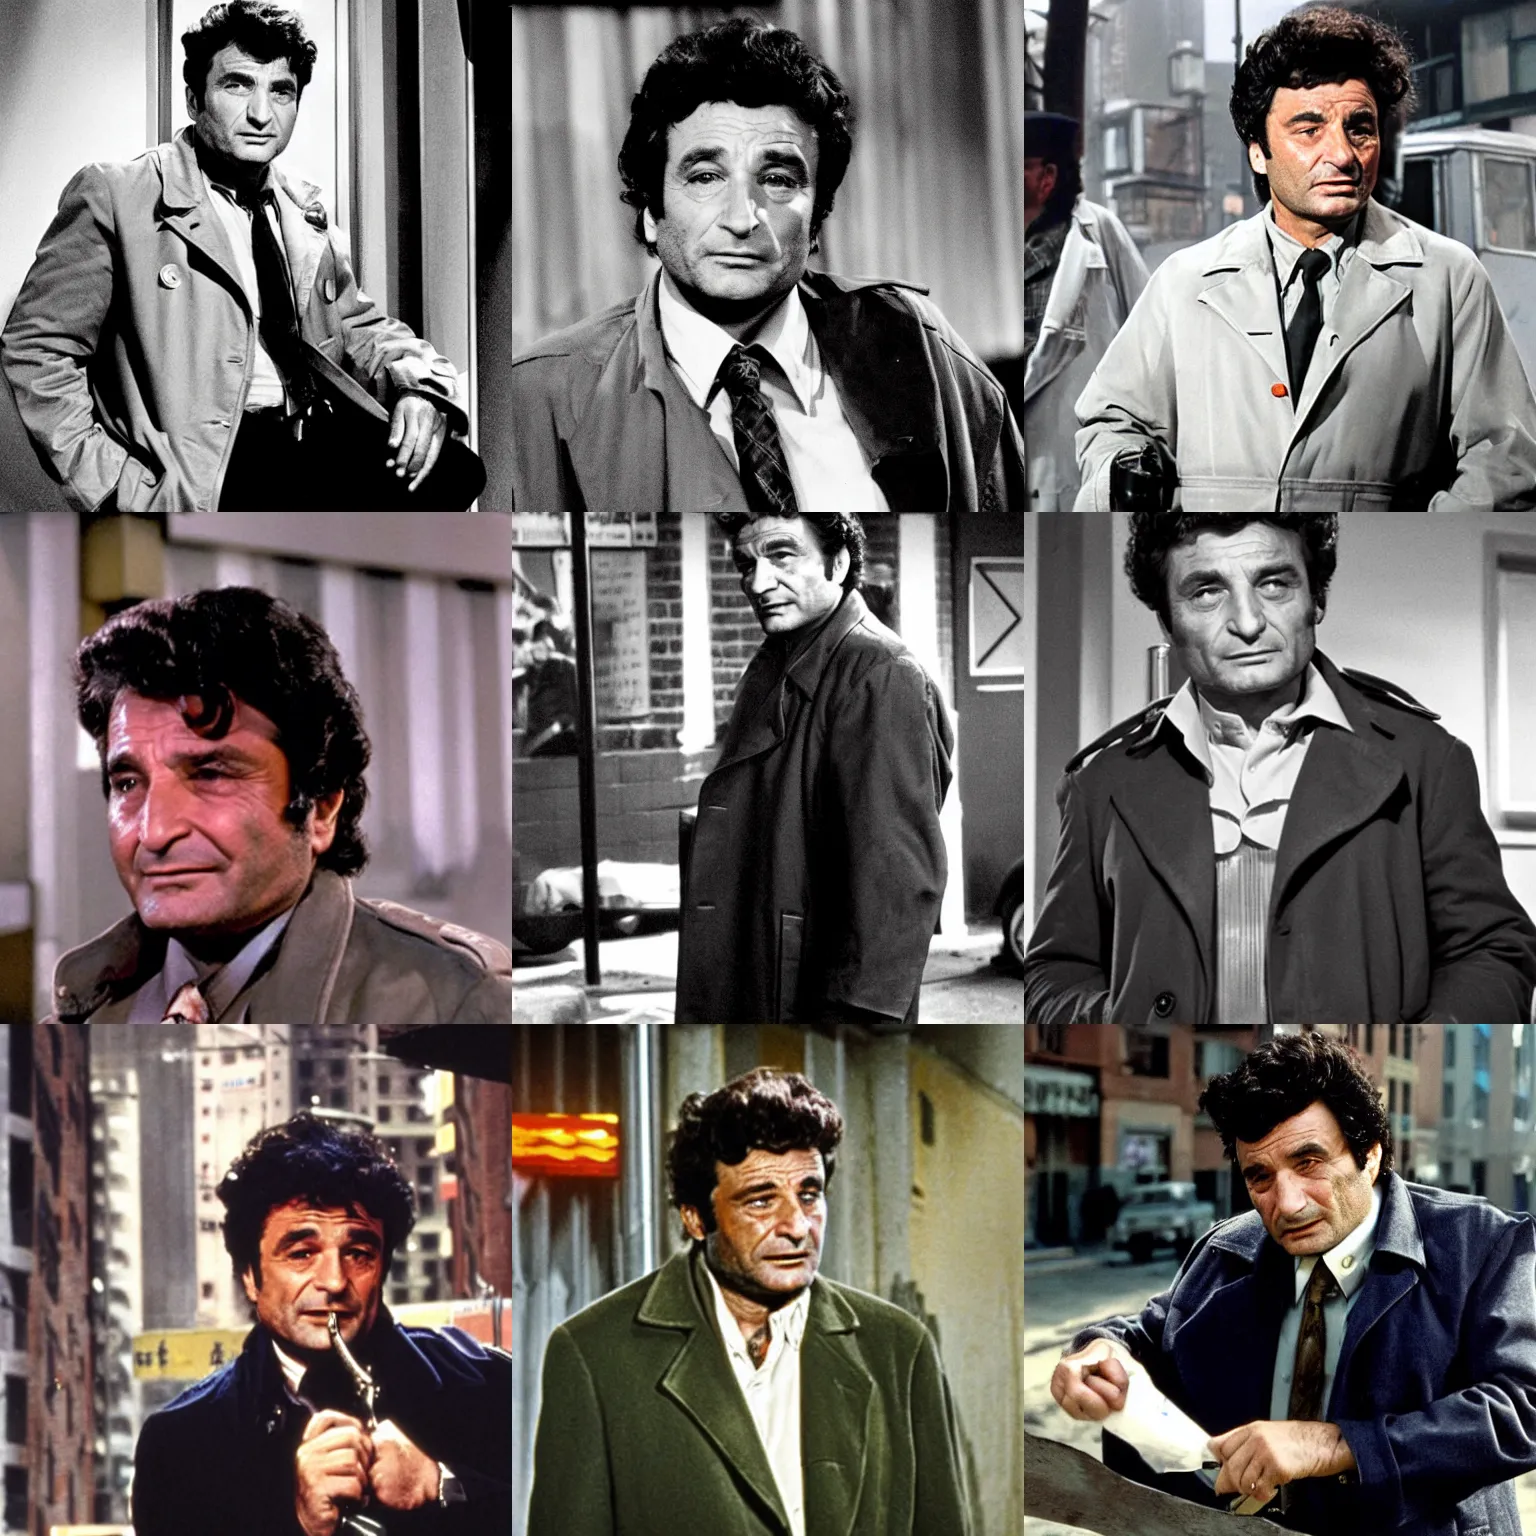 Prompt: police detective columbo ( played by young peter falk ) in his messy trenchcoat, smirking, in a cyberpunk city